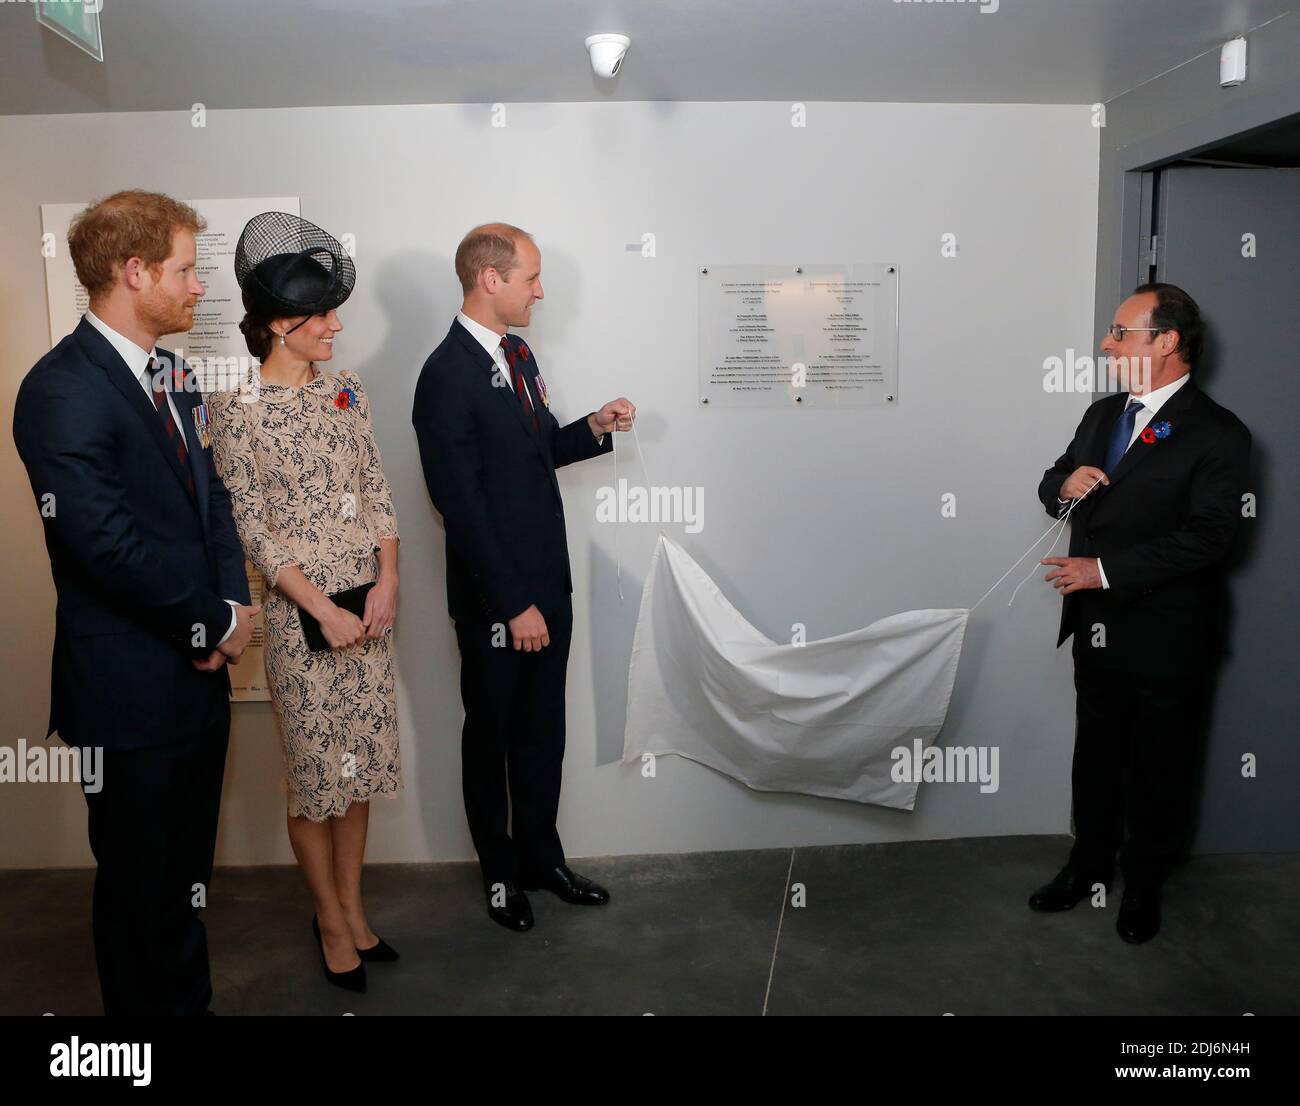 France's President Francois Hollande, right, and Prince William, the Duke of Cambridge, pull a curtain to unveil a commemorative plate inside the World War I Thiepval monument while his wife Kate, the Duchess of Cambridge, and Britain's Prince Harry, left, look on prior to the Somme centenary commemorations in Thiepval, northern France, Friday, July 1st, 2016. One week after Britain's vote to leave the European Union, Prime Minister David Cameron and royal family members will stand side-by-side with France's President to celebrate their historic alliance at the centenary of the deadliest battl Stock Photo